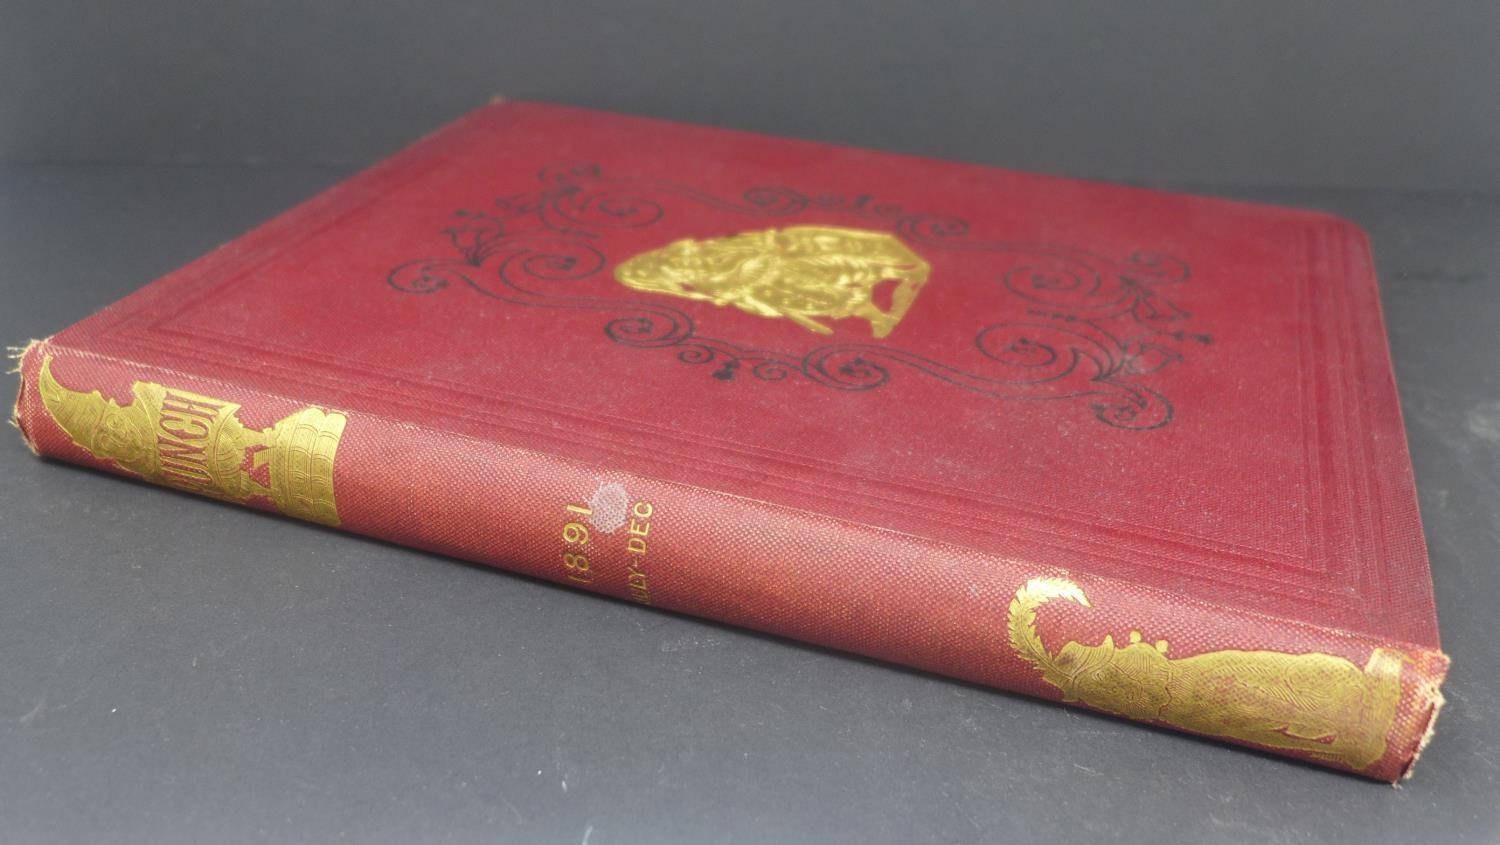 An 1891 July-Dec Edition of Punch magazine, red cloth bound and gilt cover, illustrated within, 28 x - Image 2 of 5